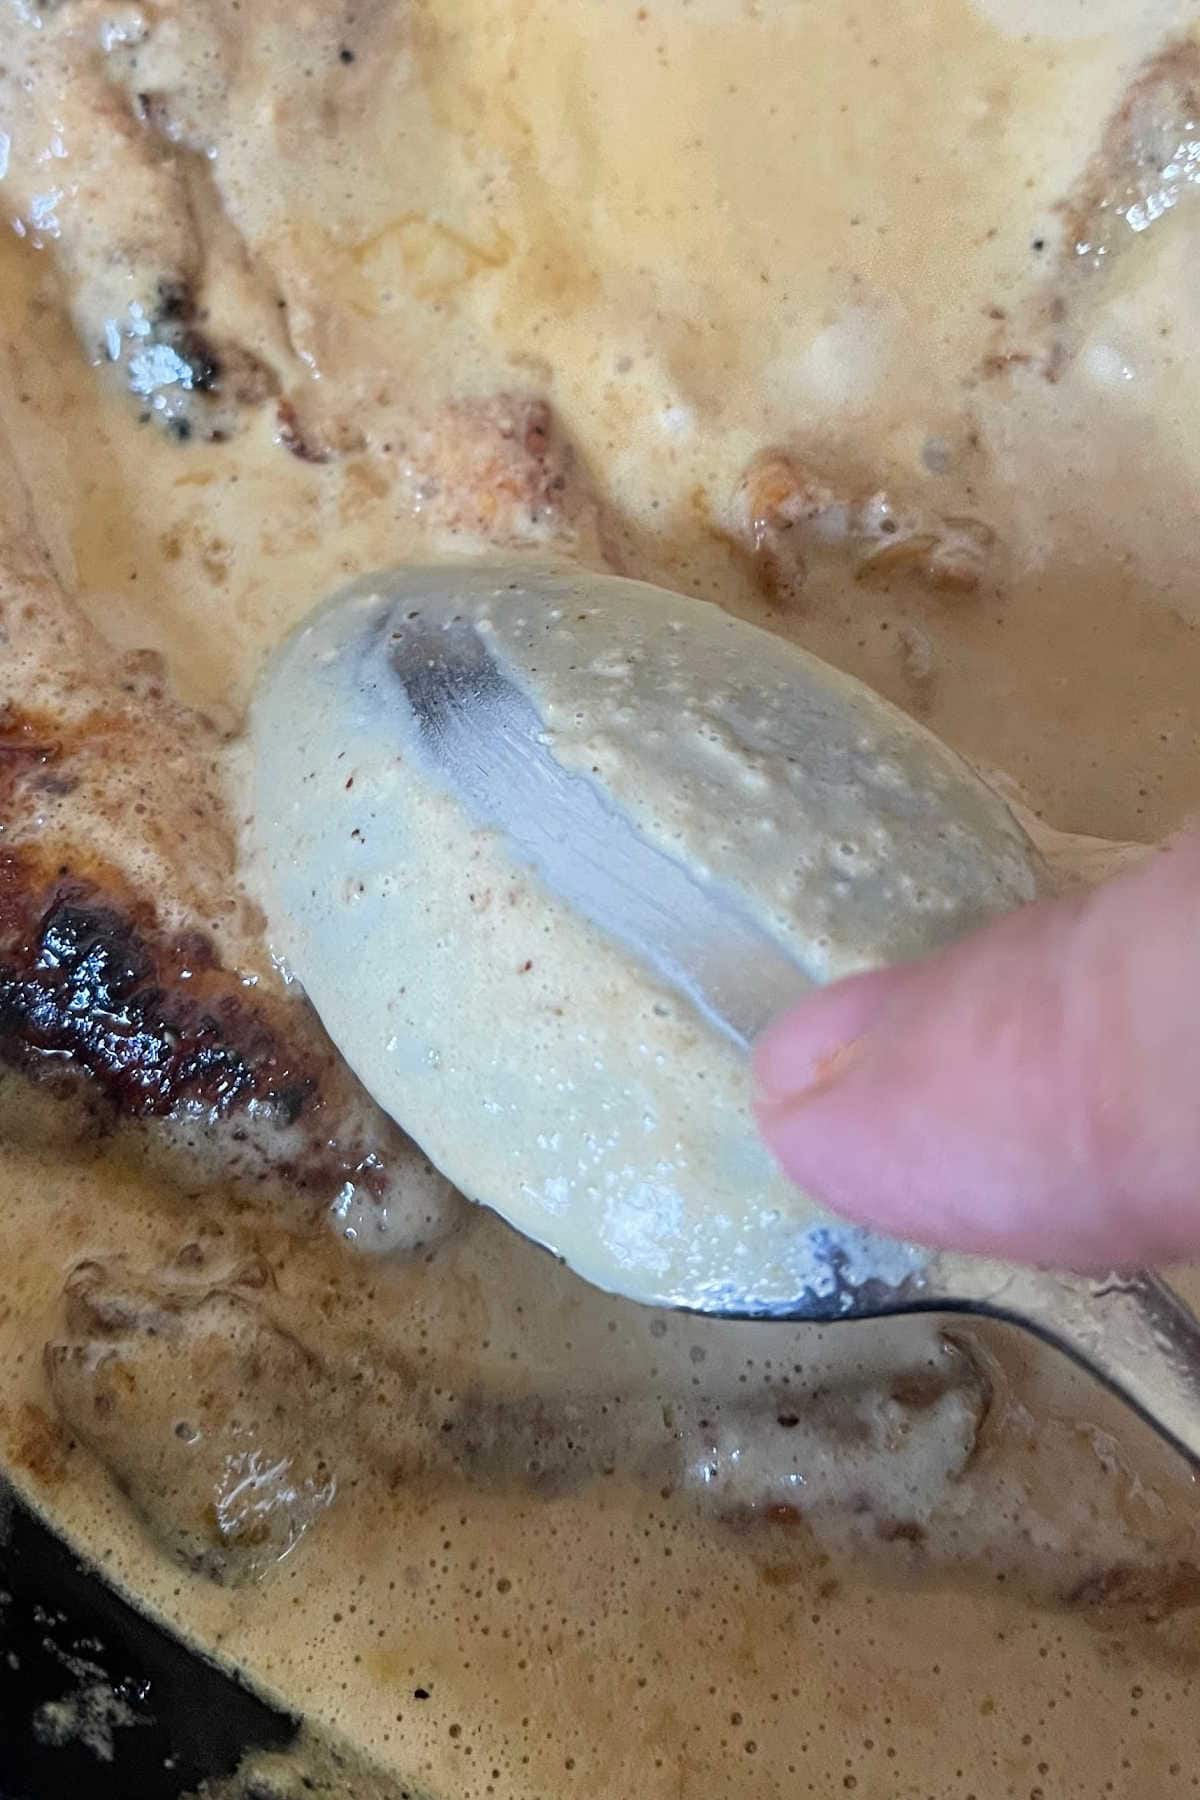 Testing the sauce for thickness on the back of a spoon.